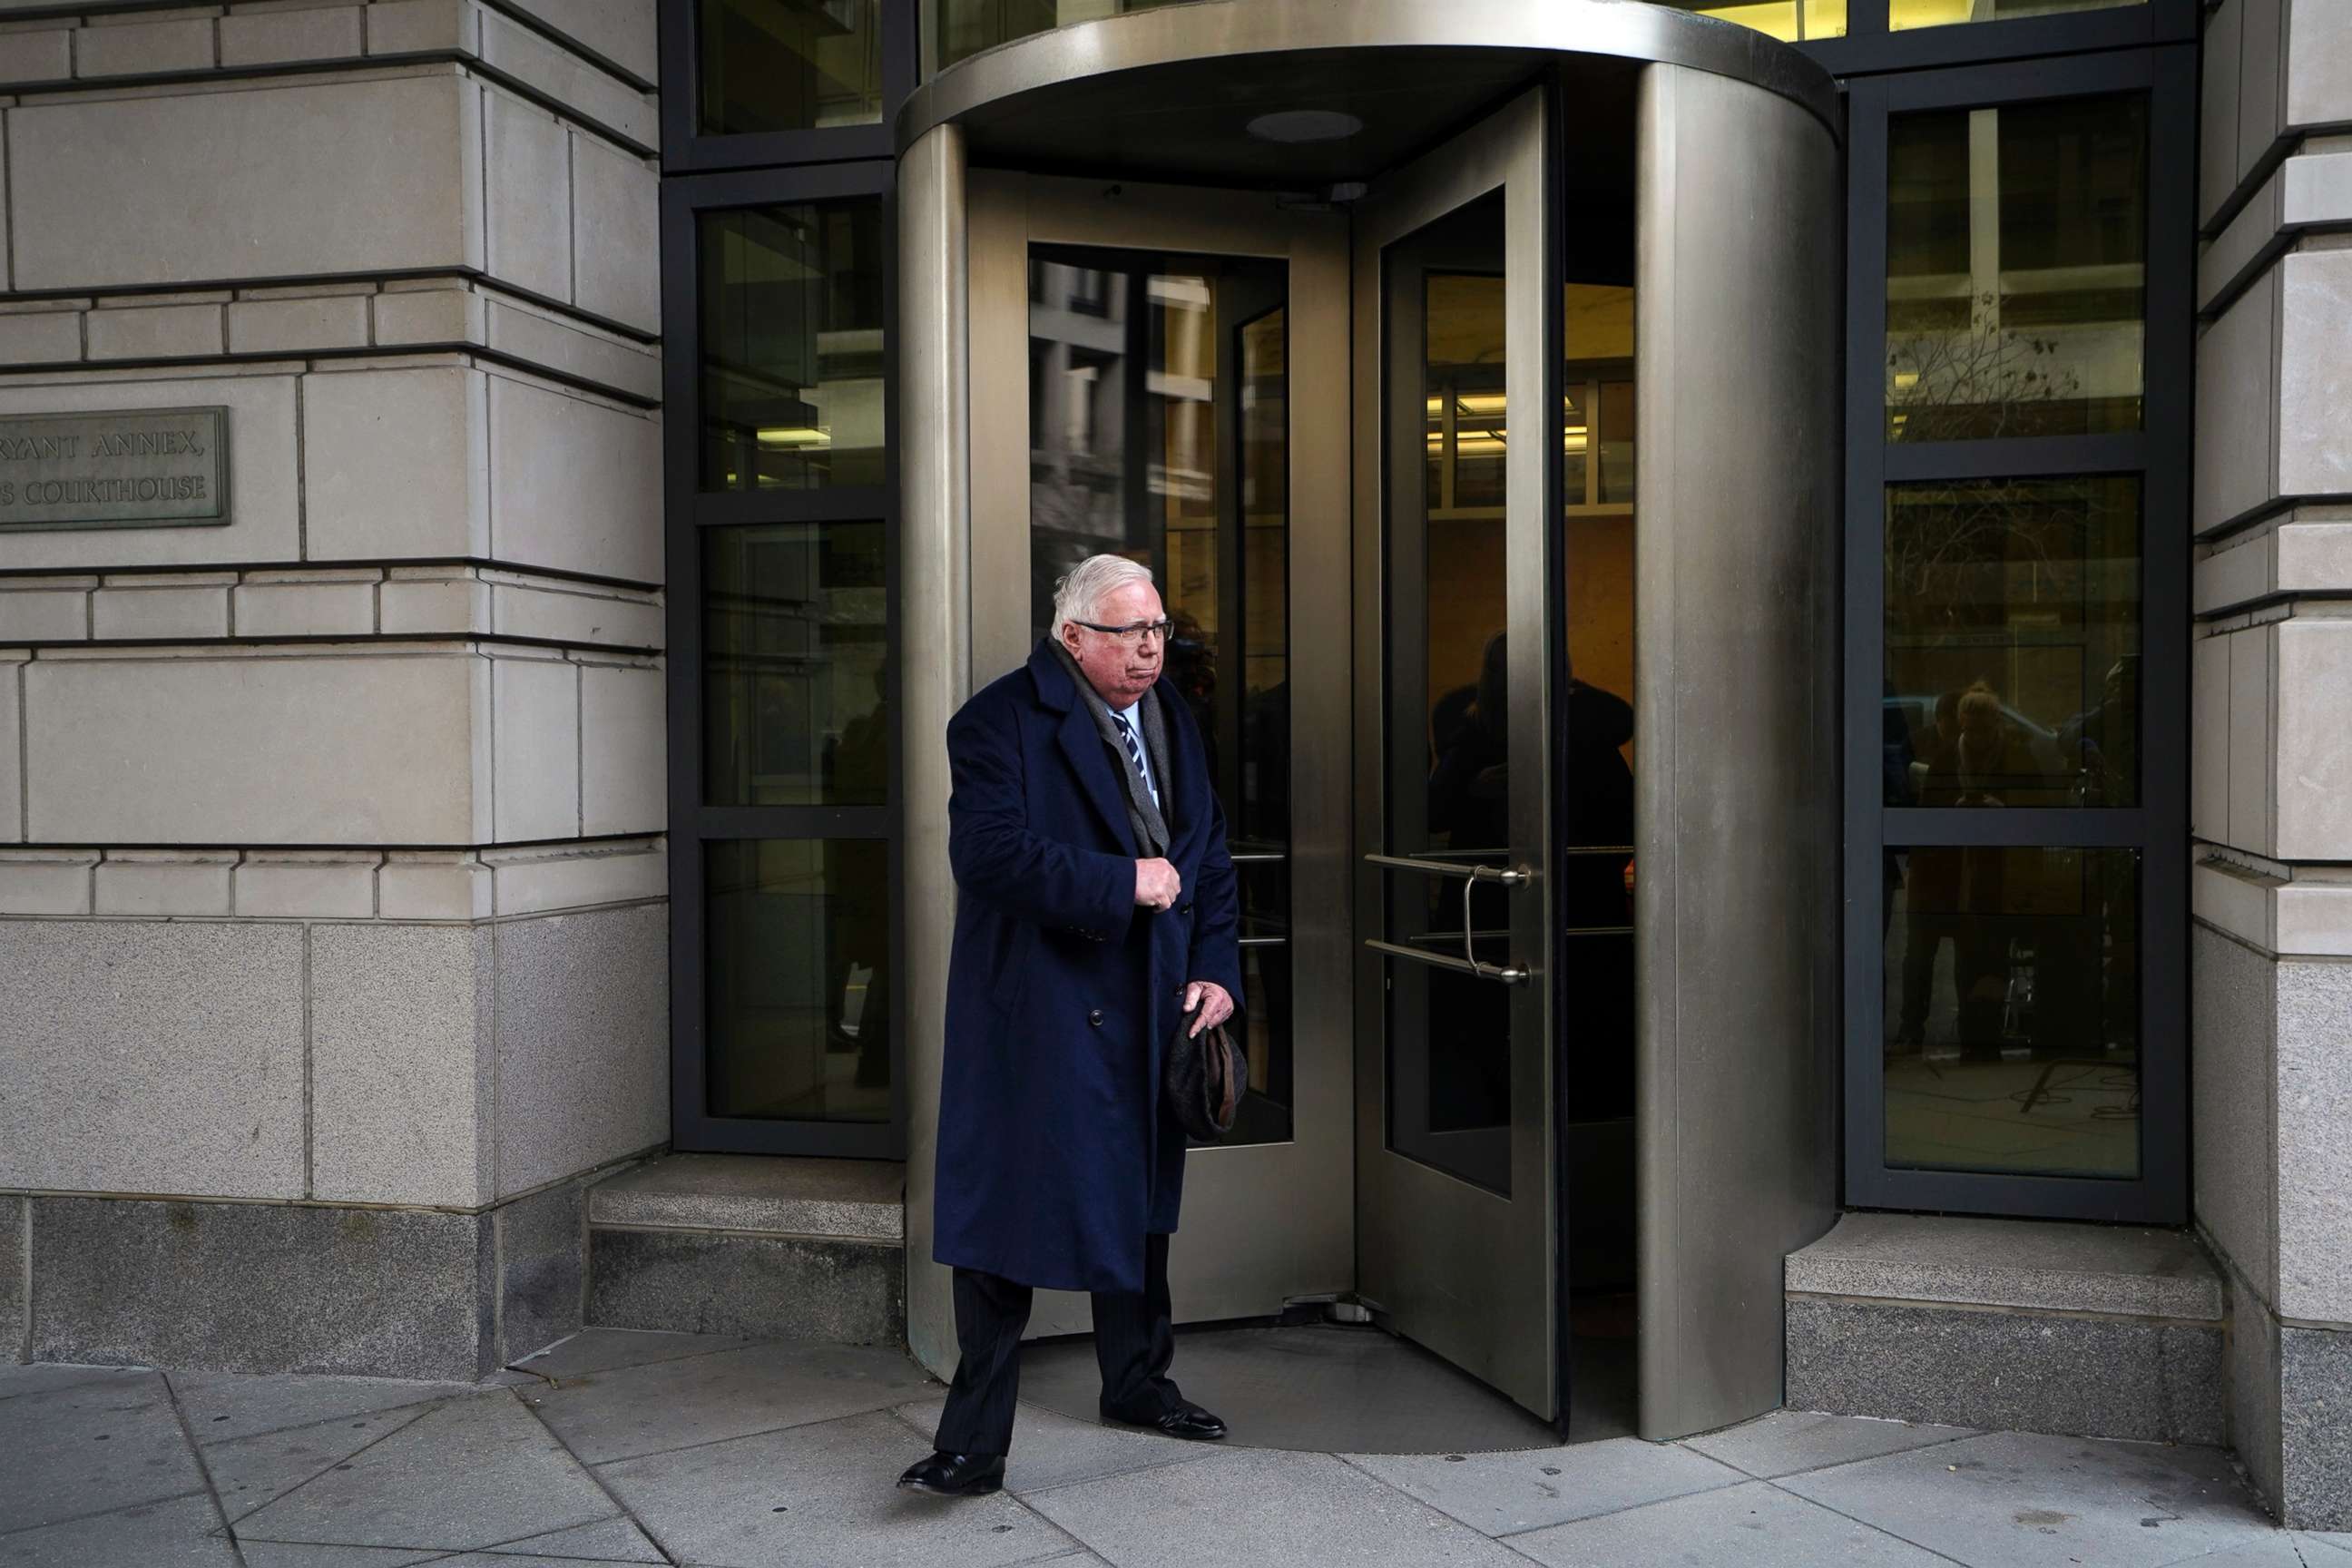 PHOTO:Jerome Corsi exits the federal courthouse in Washington D.C., in this Jan. 3, 2019 file photo.